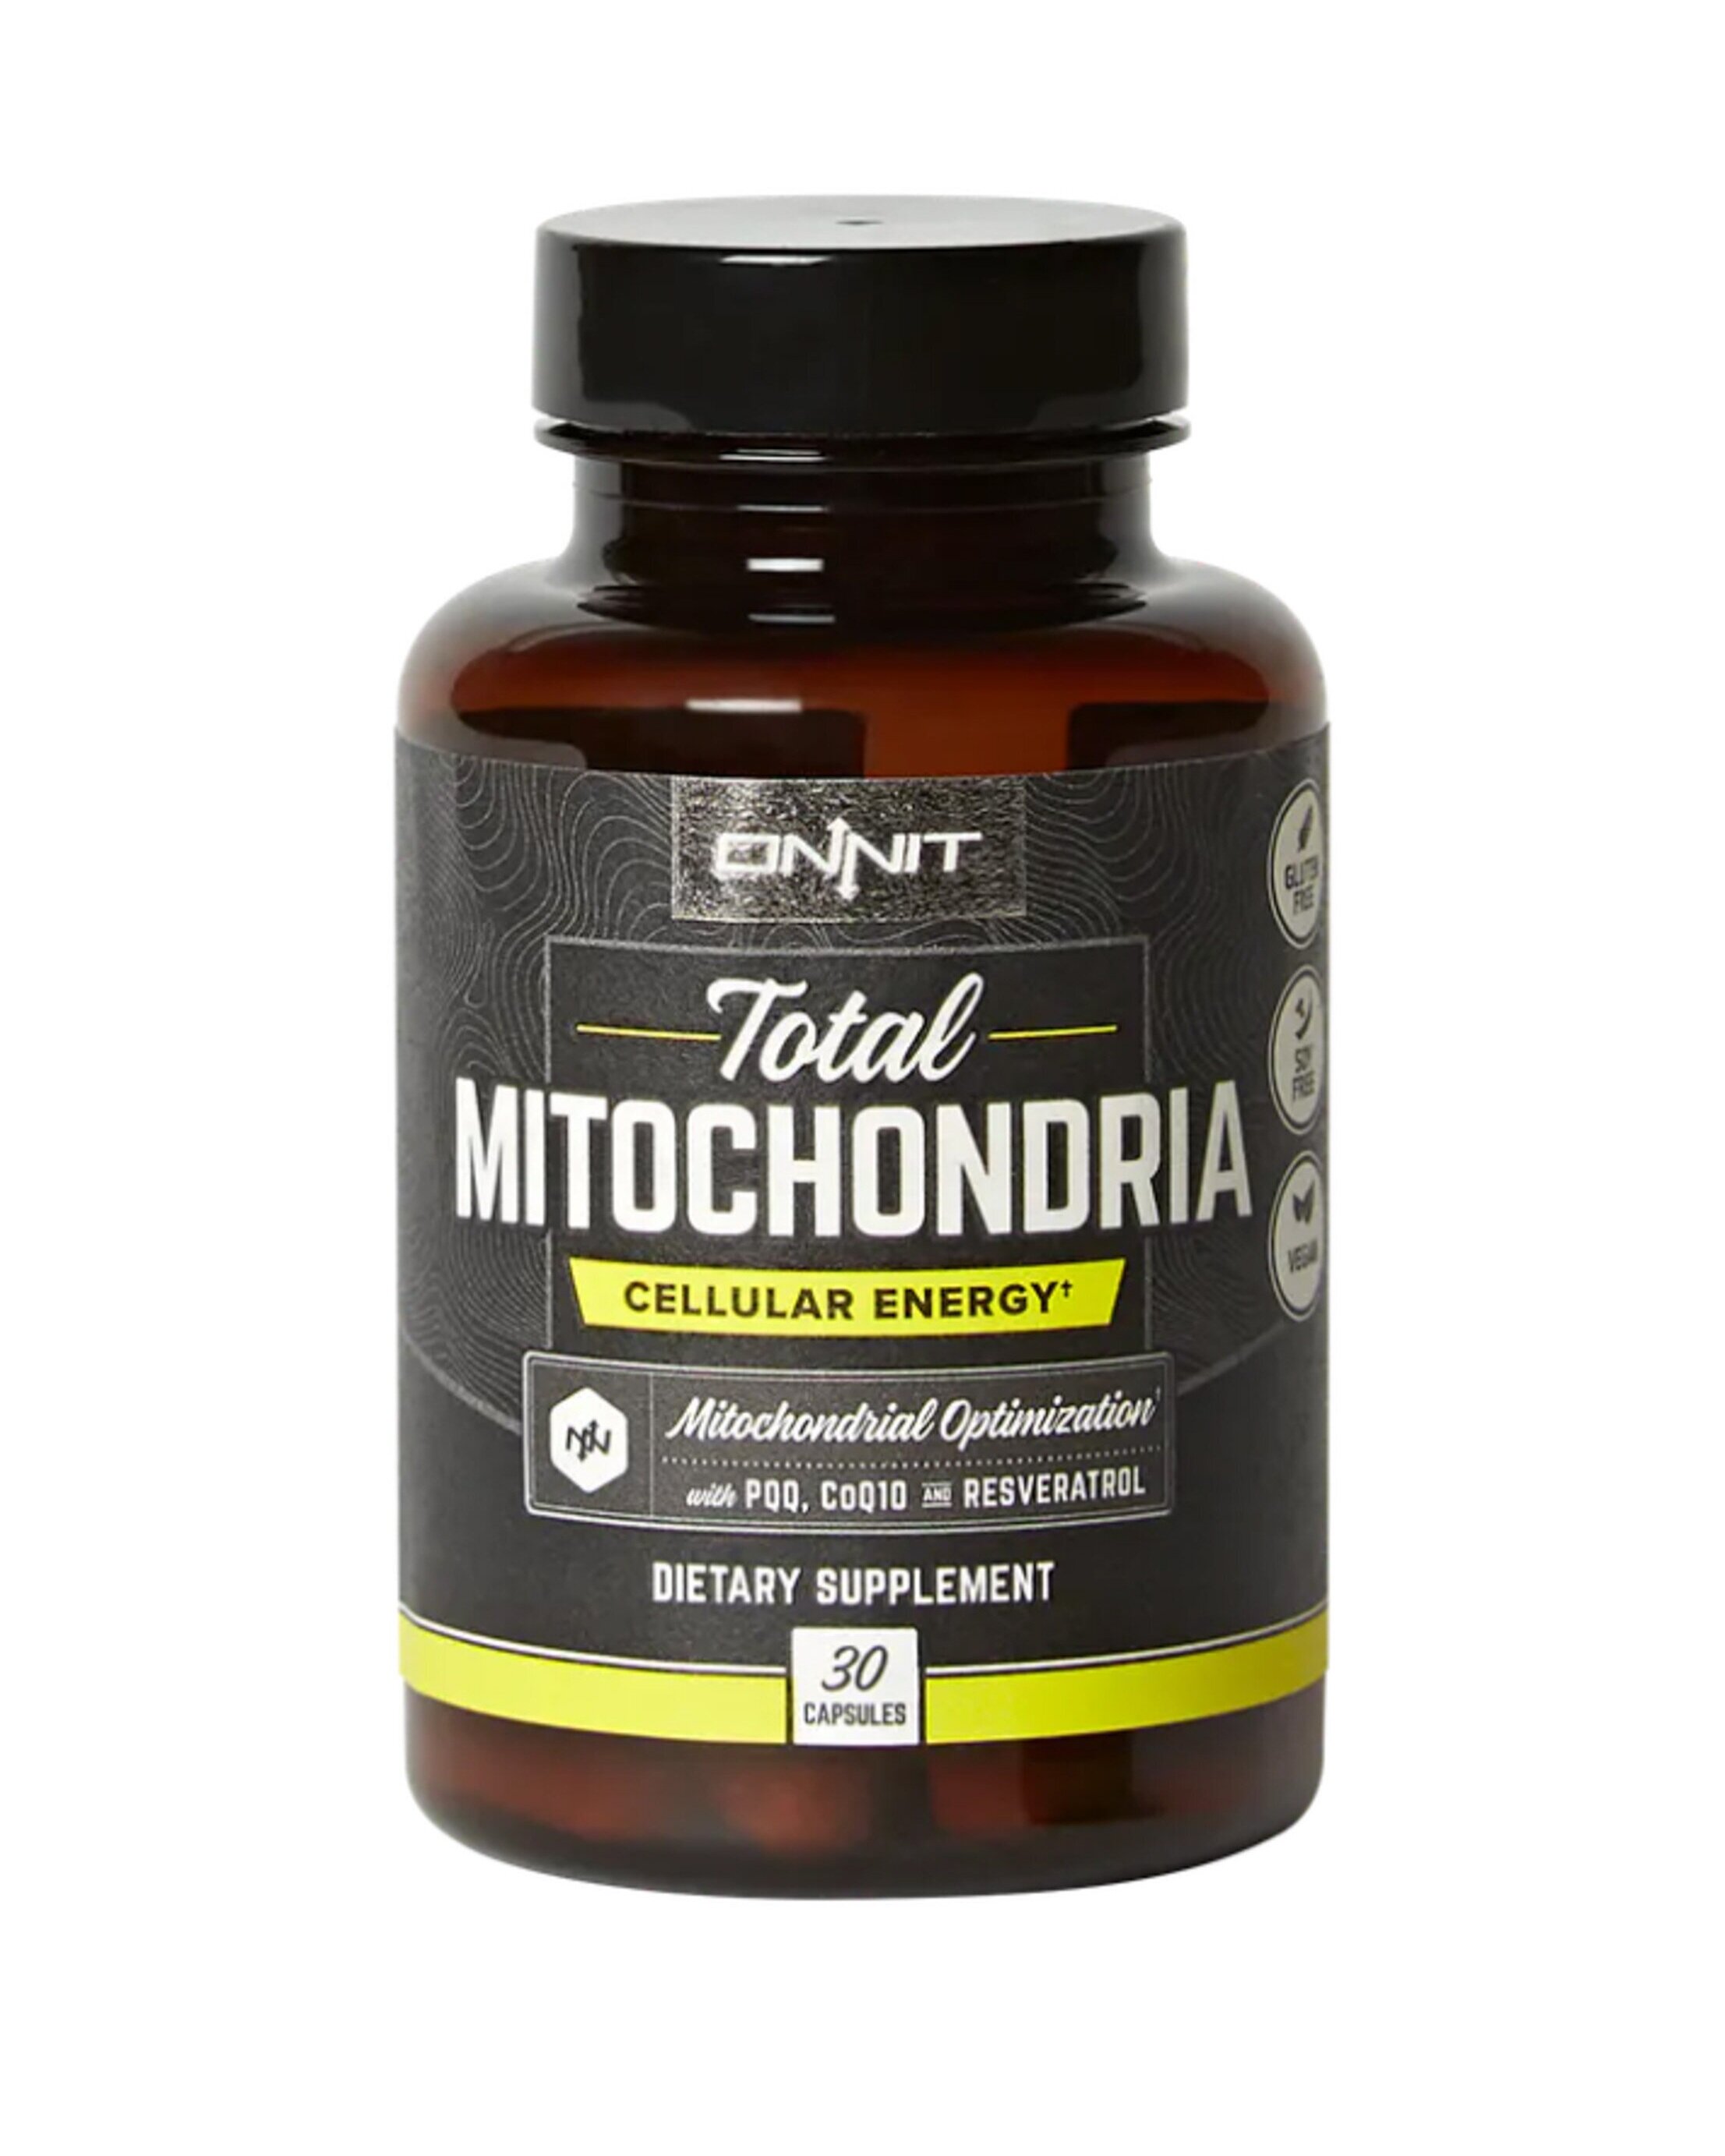 Onnit Total Mitochondria